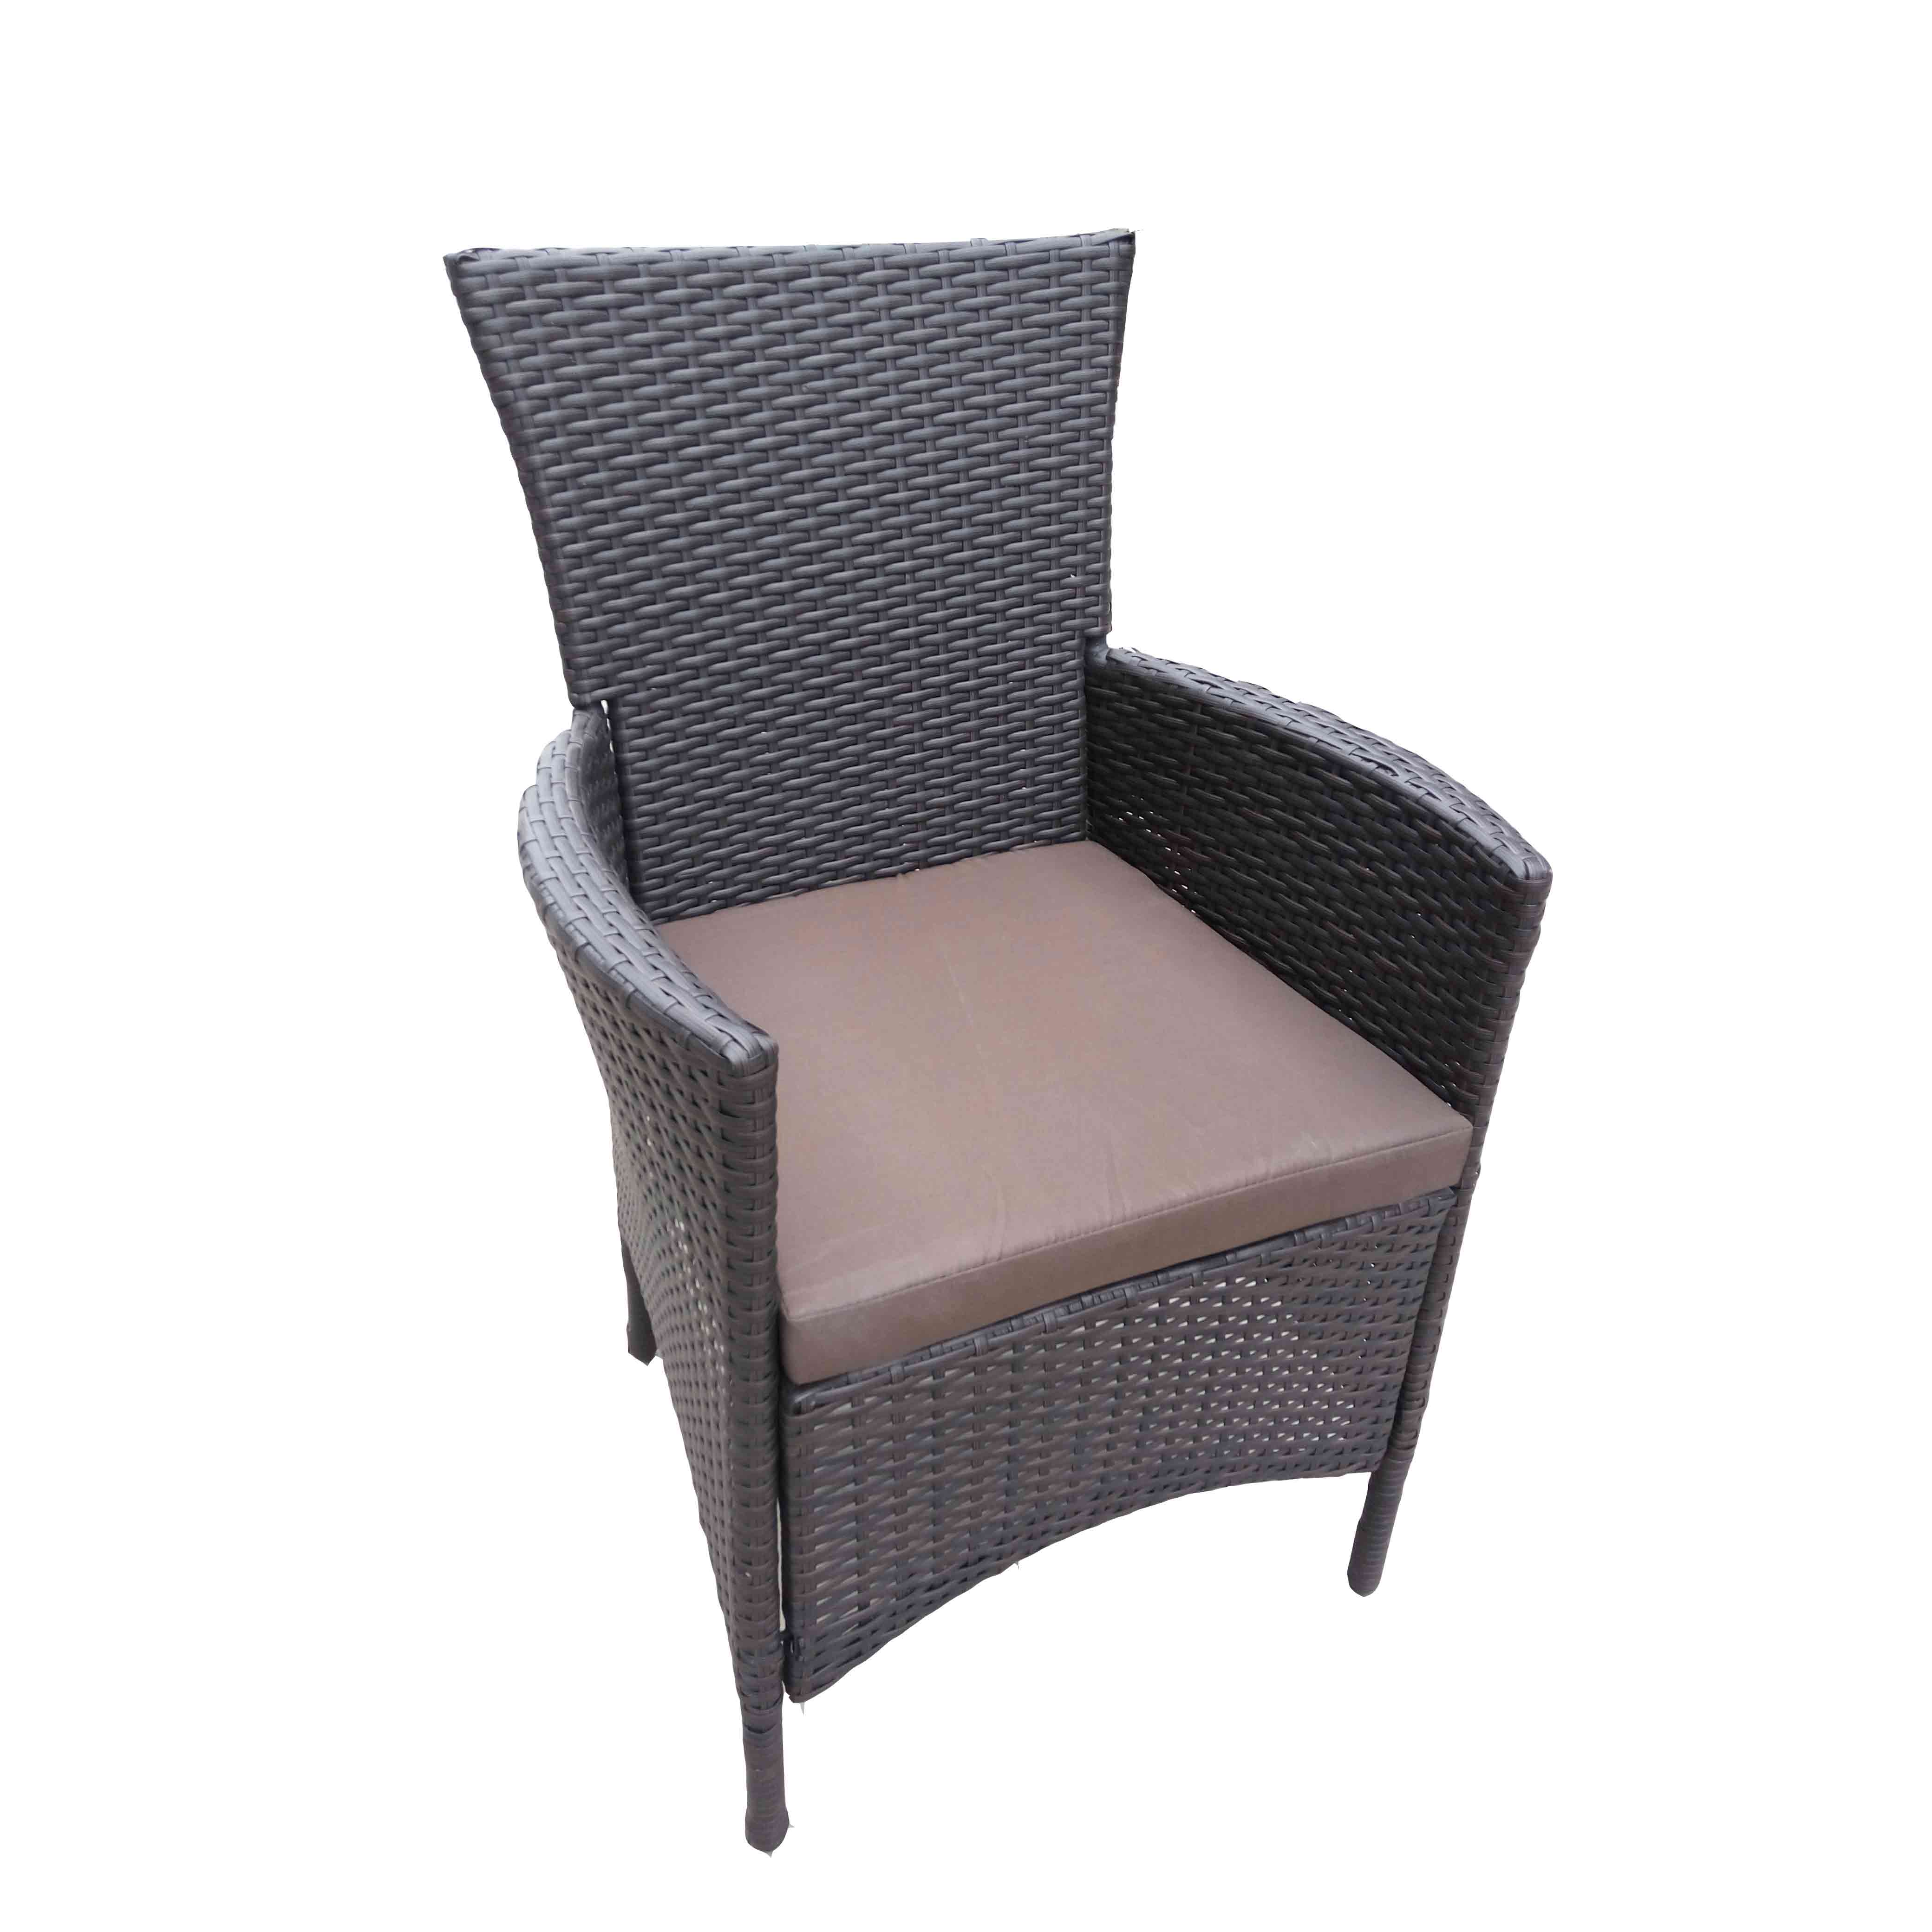 JJC3005 Steel Frame Stacking Wicker dinning Chair Featured Image